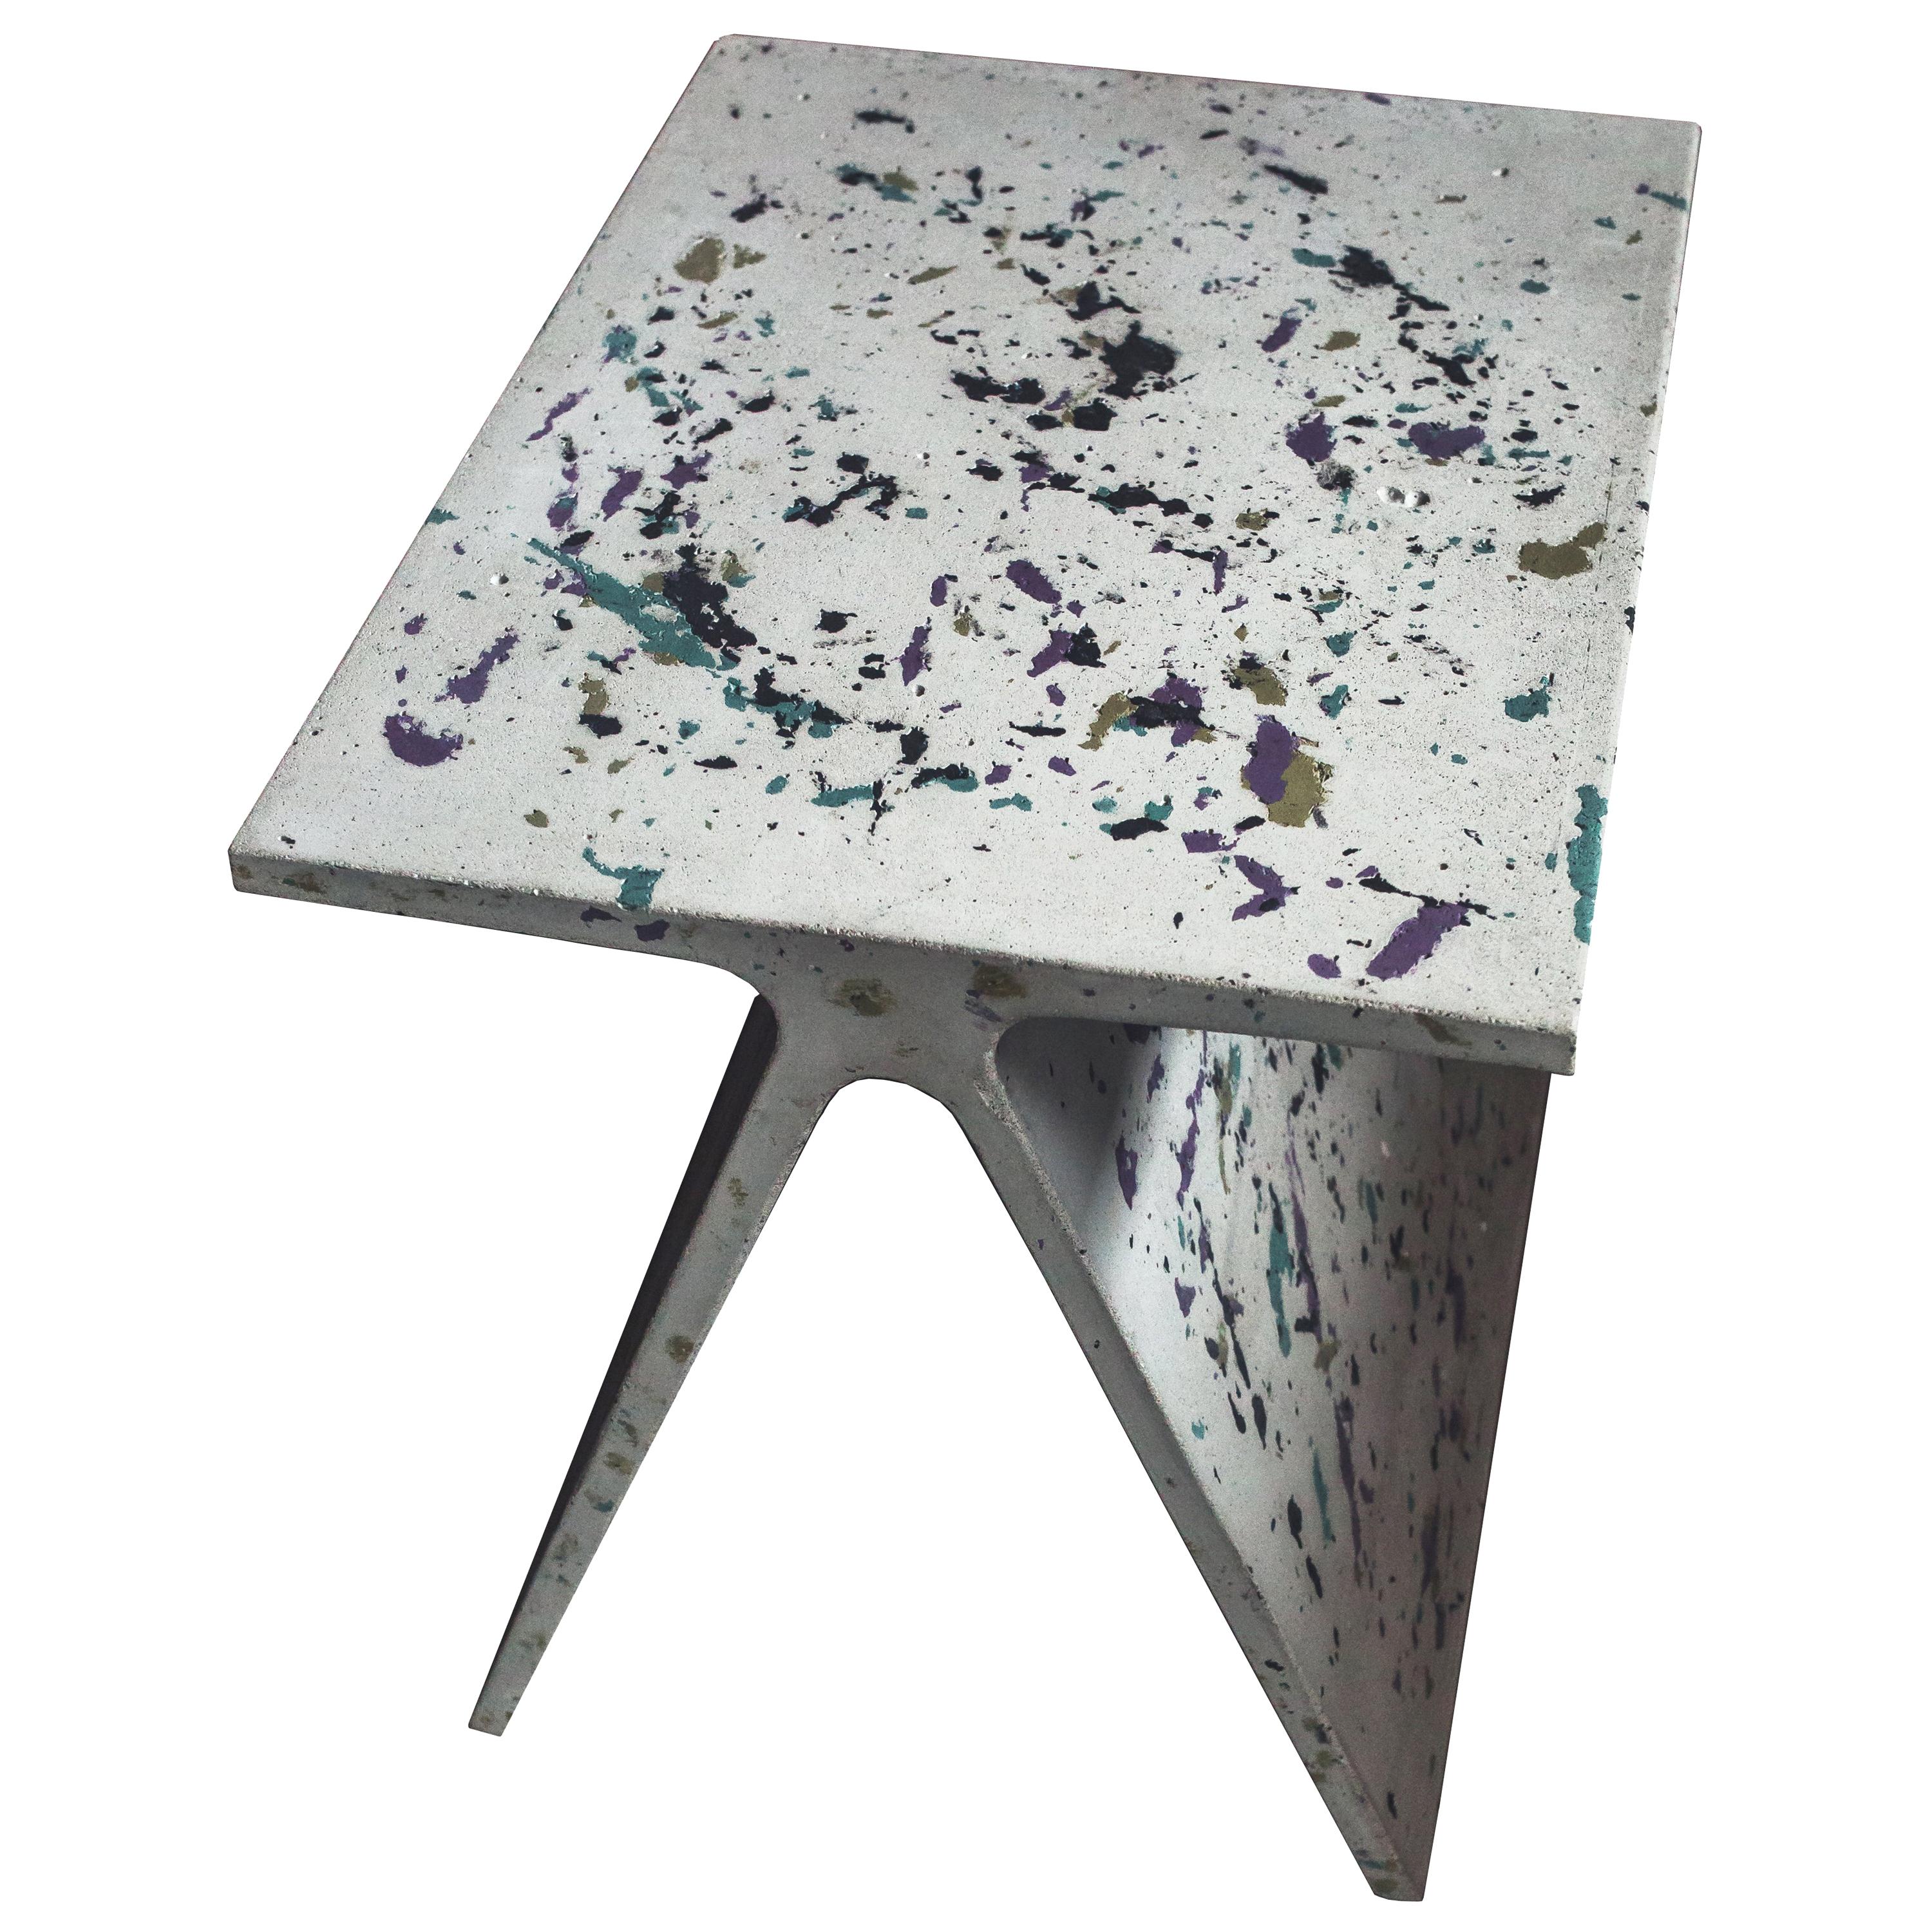 Alpha Q End Table or Stool, Concrete Chapa Ed. for Indoor or Outdoor by Mtharu im Angebot